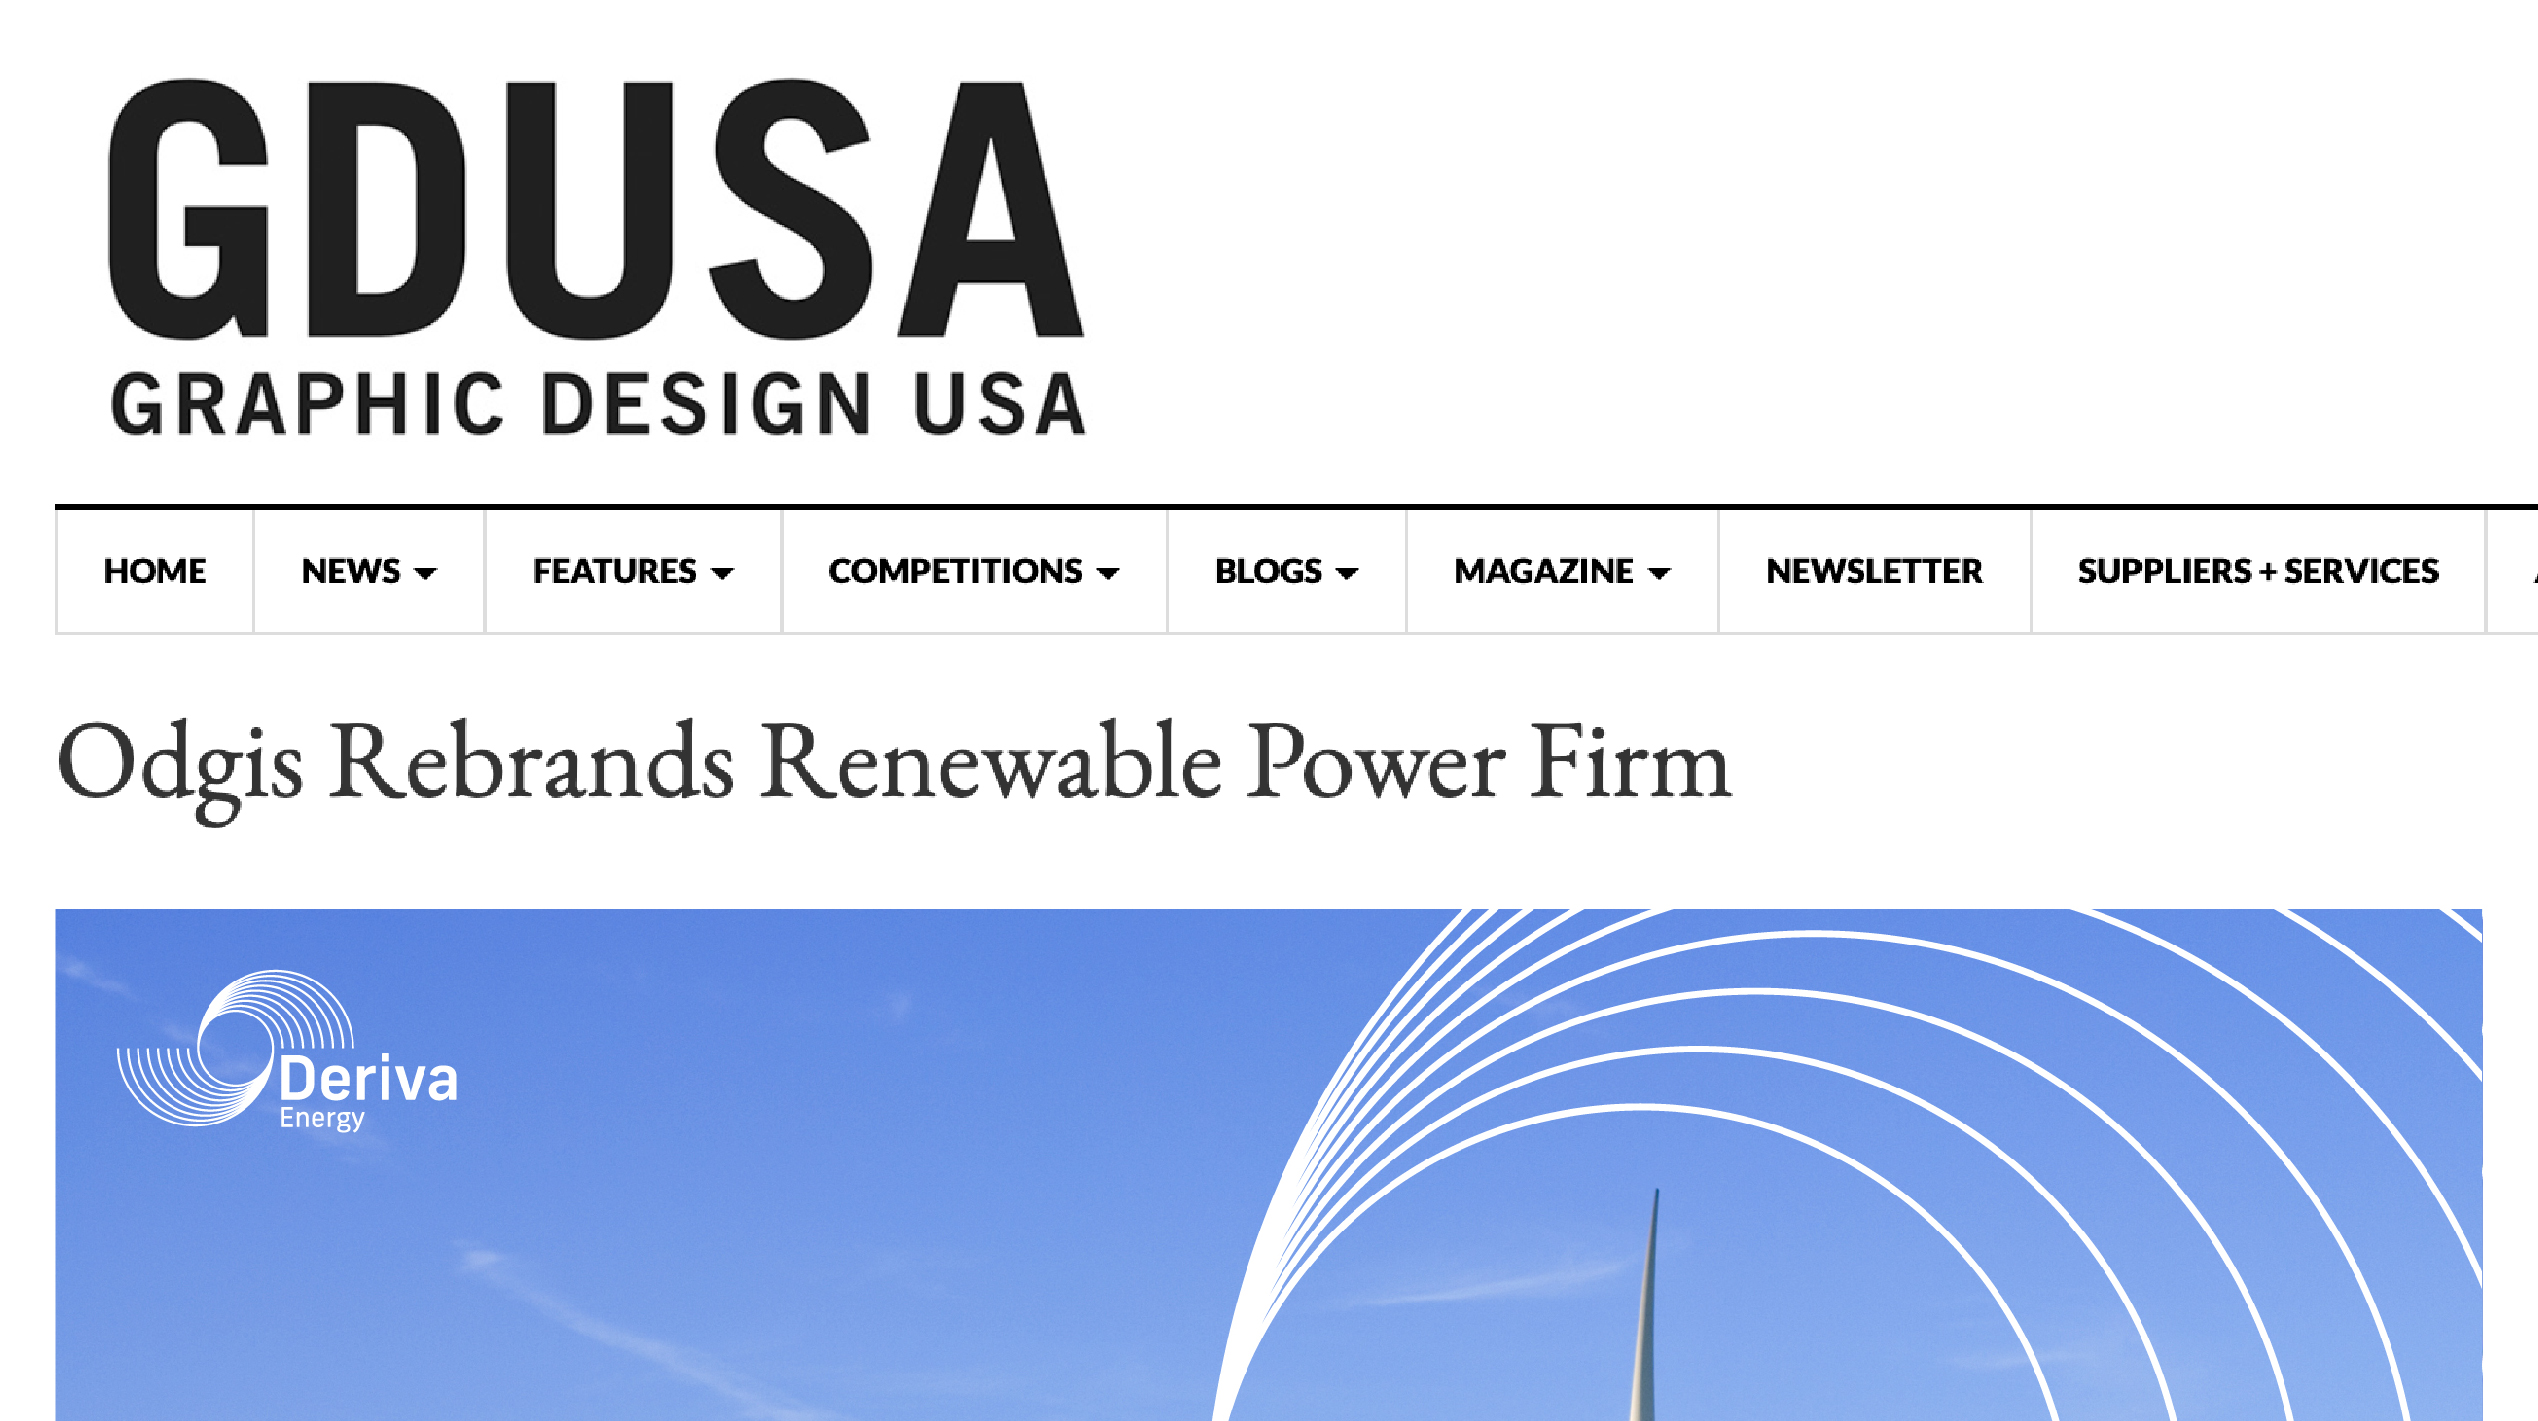 Odgis + Co Rebrand of Renewable Power Firm Featured in GDUSA